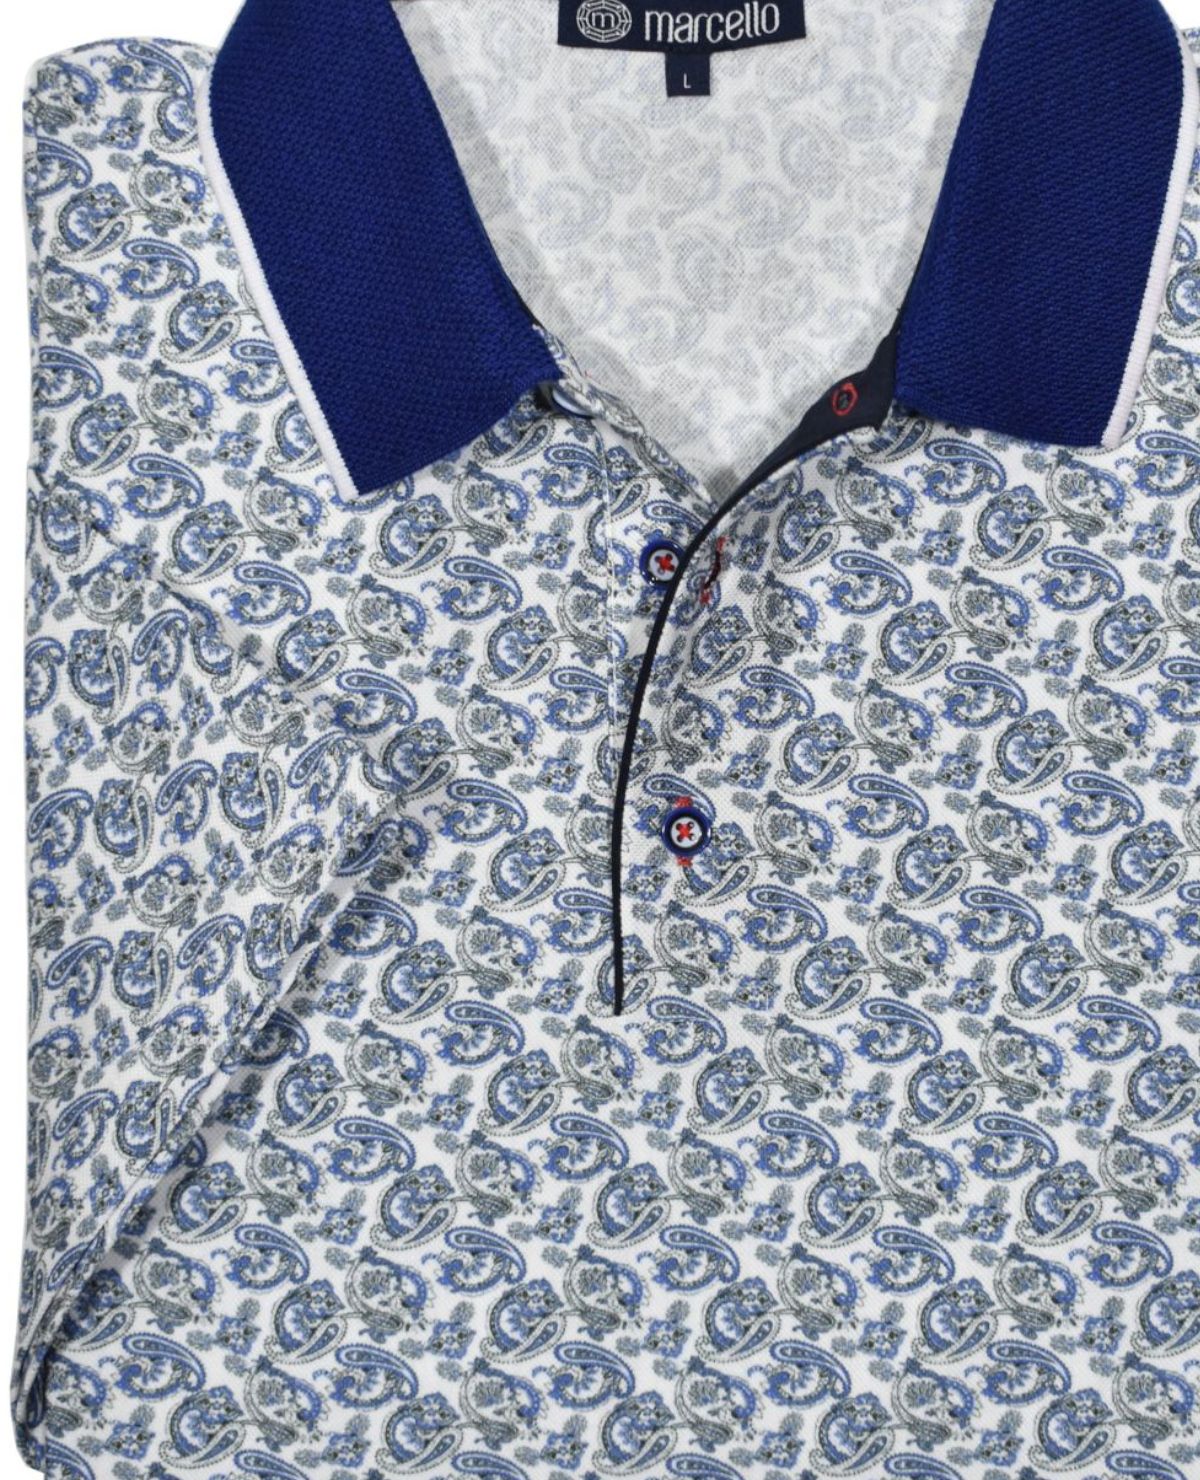 This ultra soft cotton pique polo looks timeless and feels lightweight. Its warm indigo paisley pattern, contrast trim fabric, open sleeves and custom buttons make it unique and stylish. Enjoy its classic fit and timeless look.